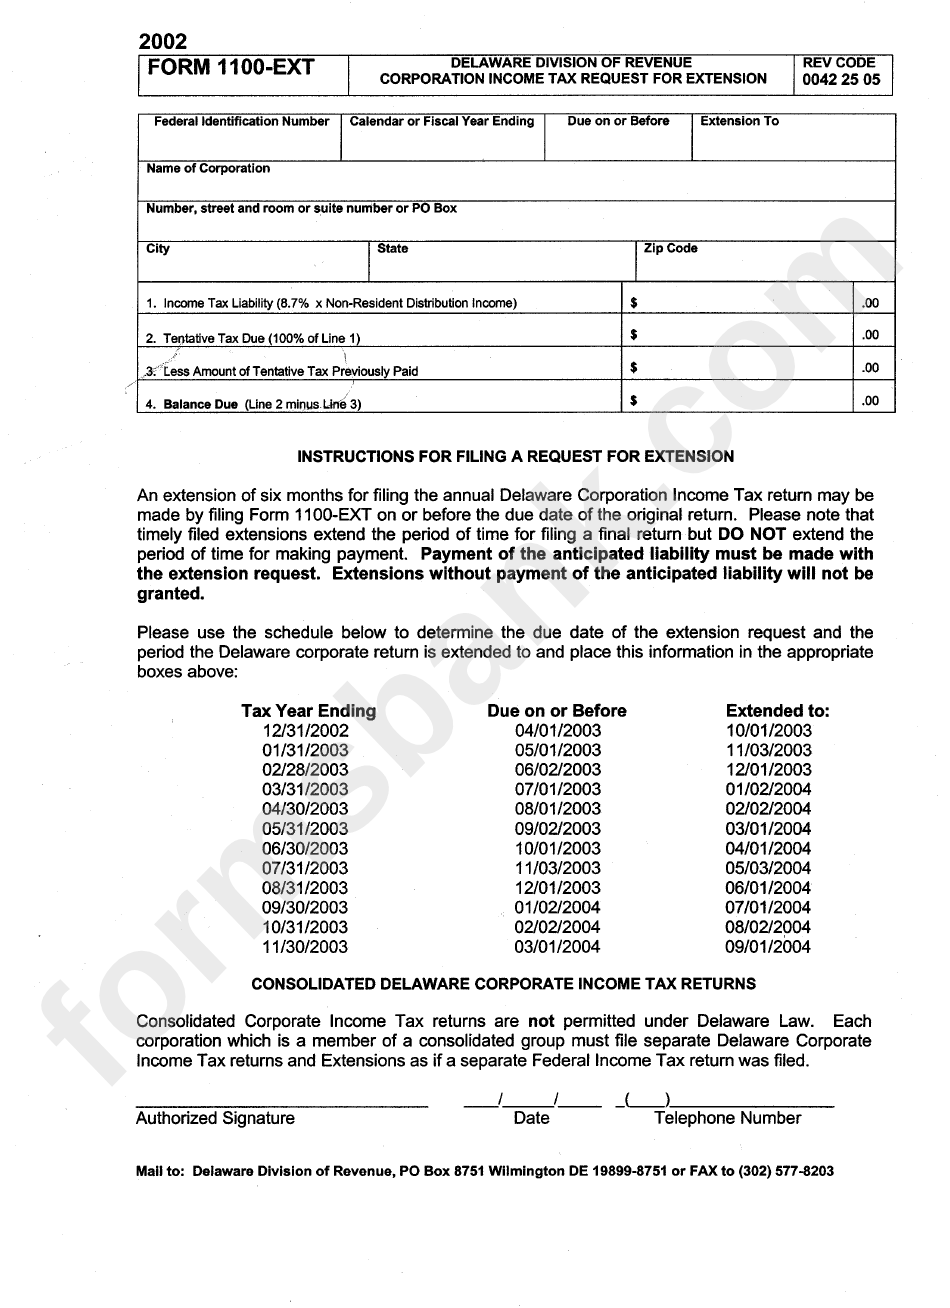 Form 1100-Ext - Corporation Income Tax Request For Extension - 2002